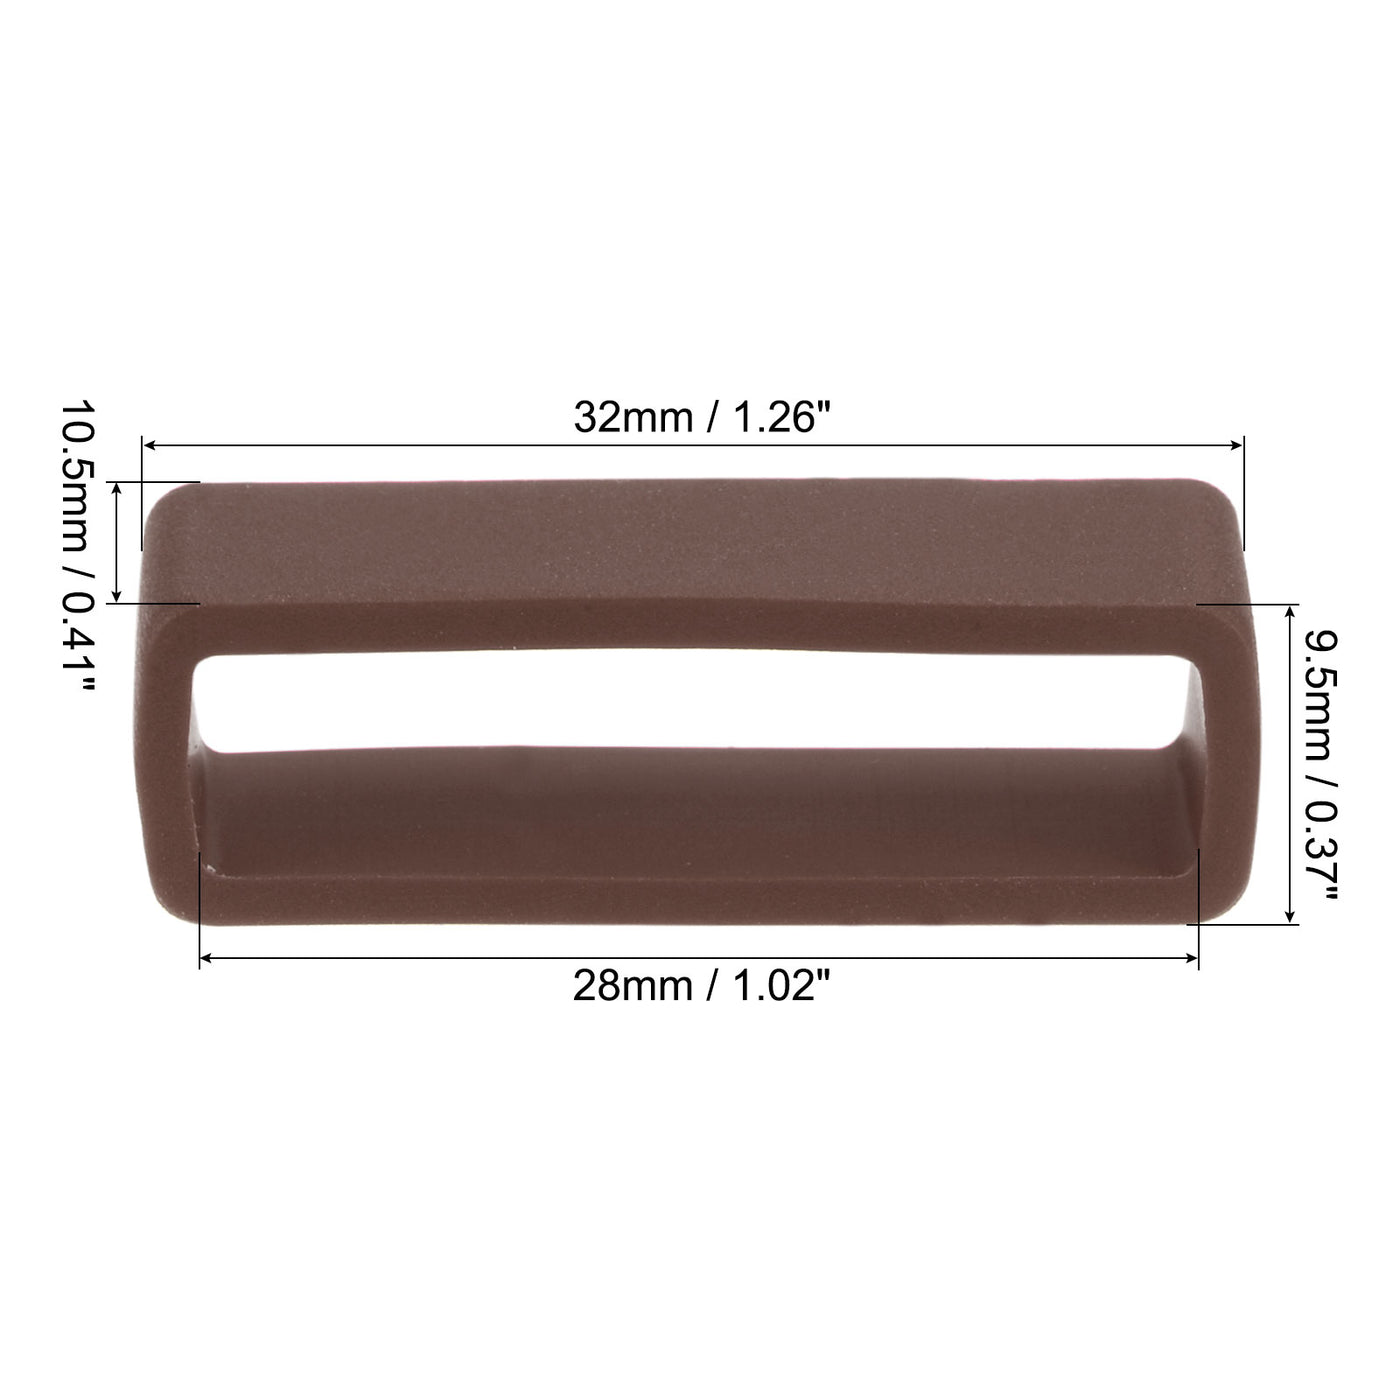 Uxcell Uxcell Watch Band Strap Loops Silicone for 28mm Width Watch Band, Brown 4 Pcs